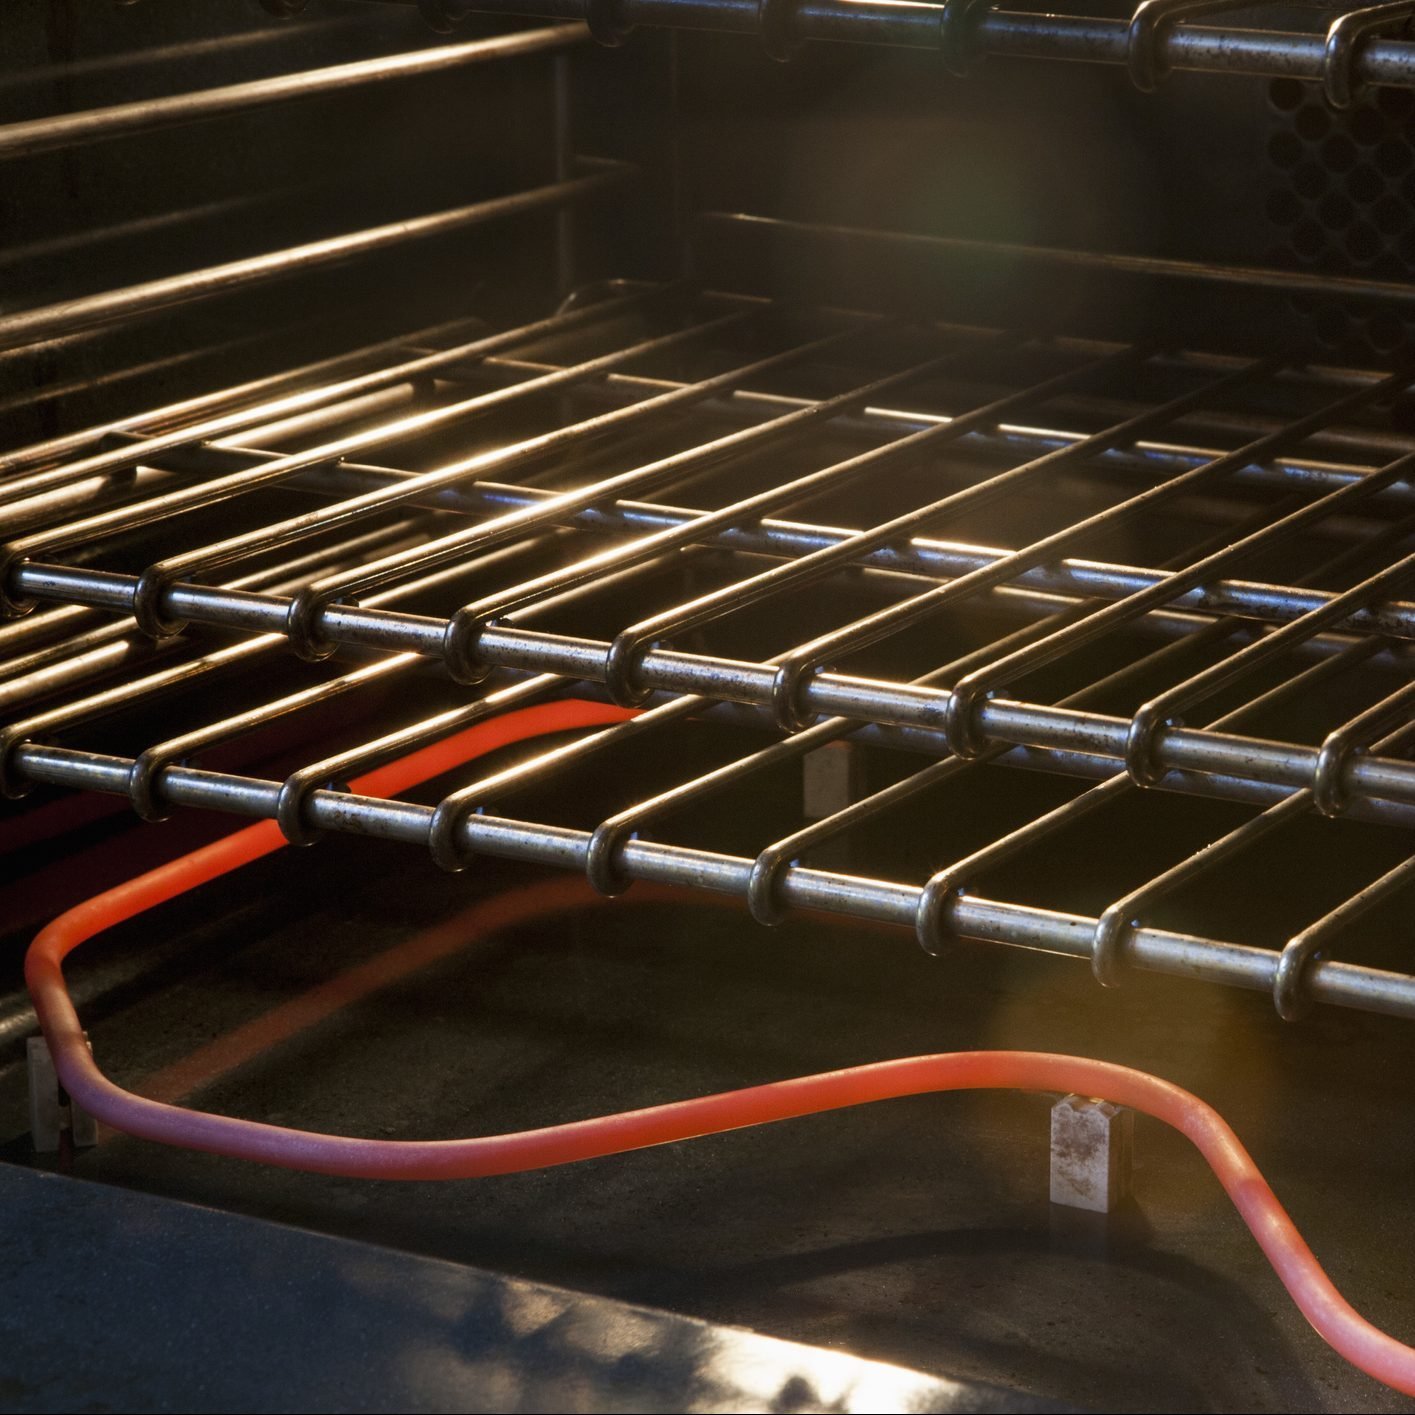 How To Replace the Heating Element in an Electric Oven (DIY)